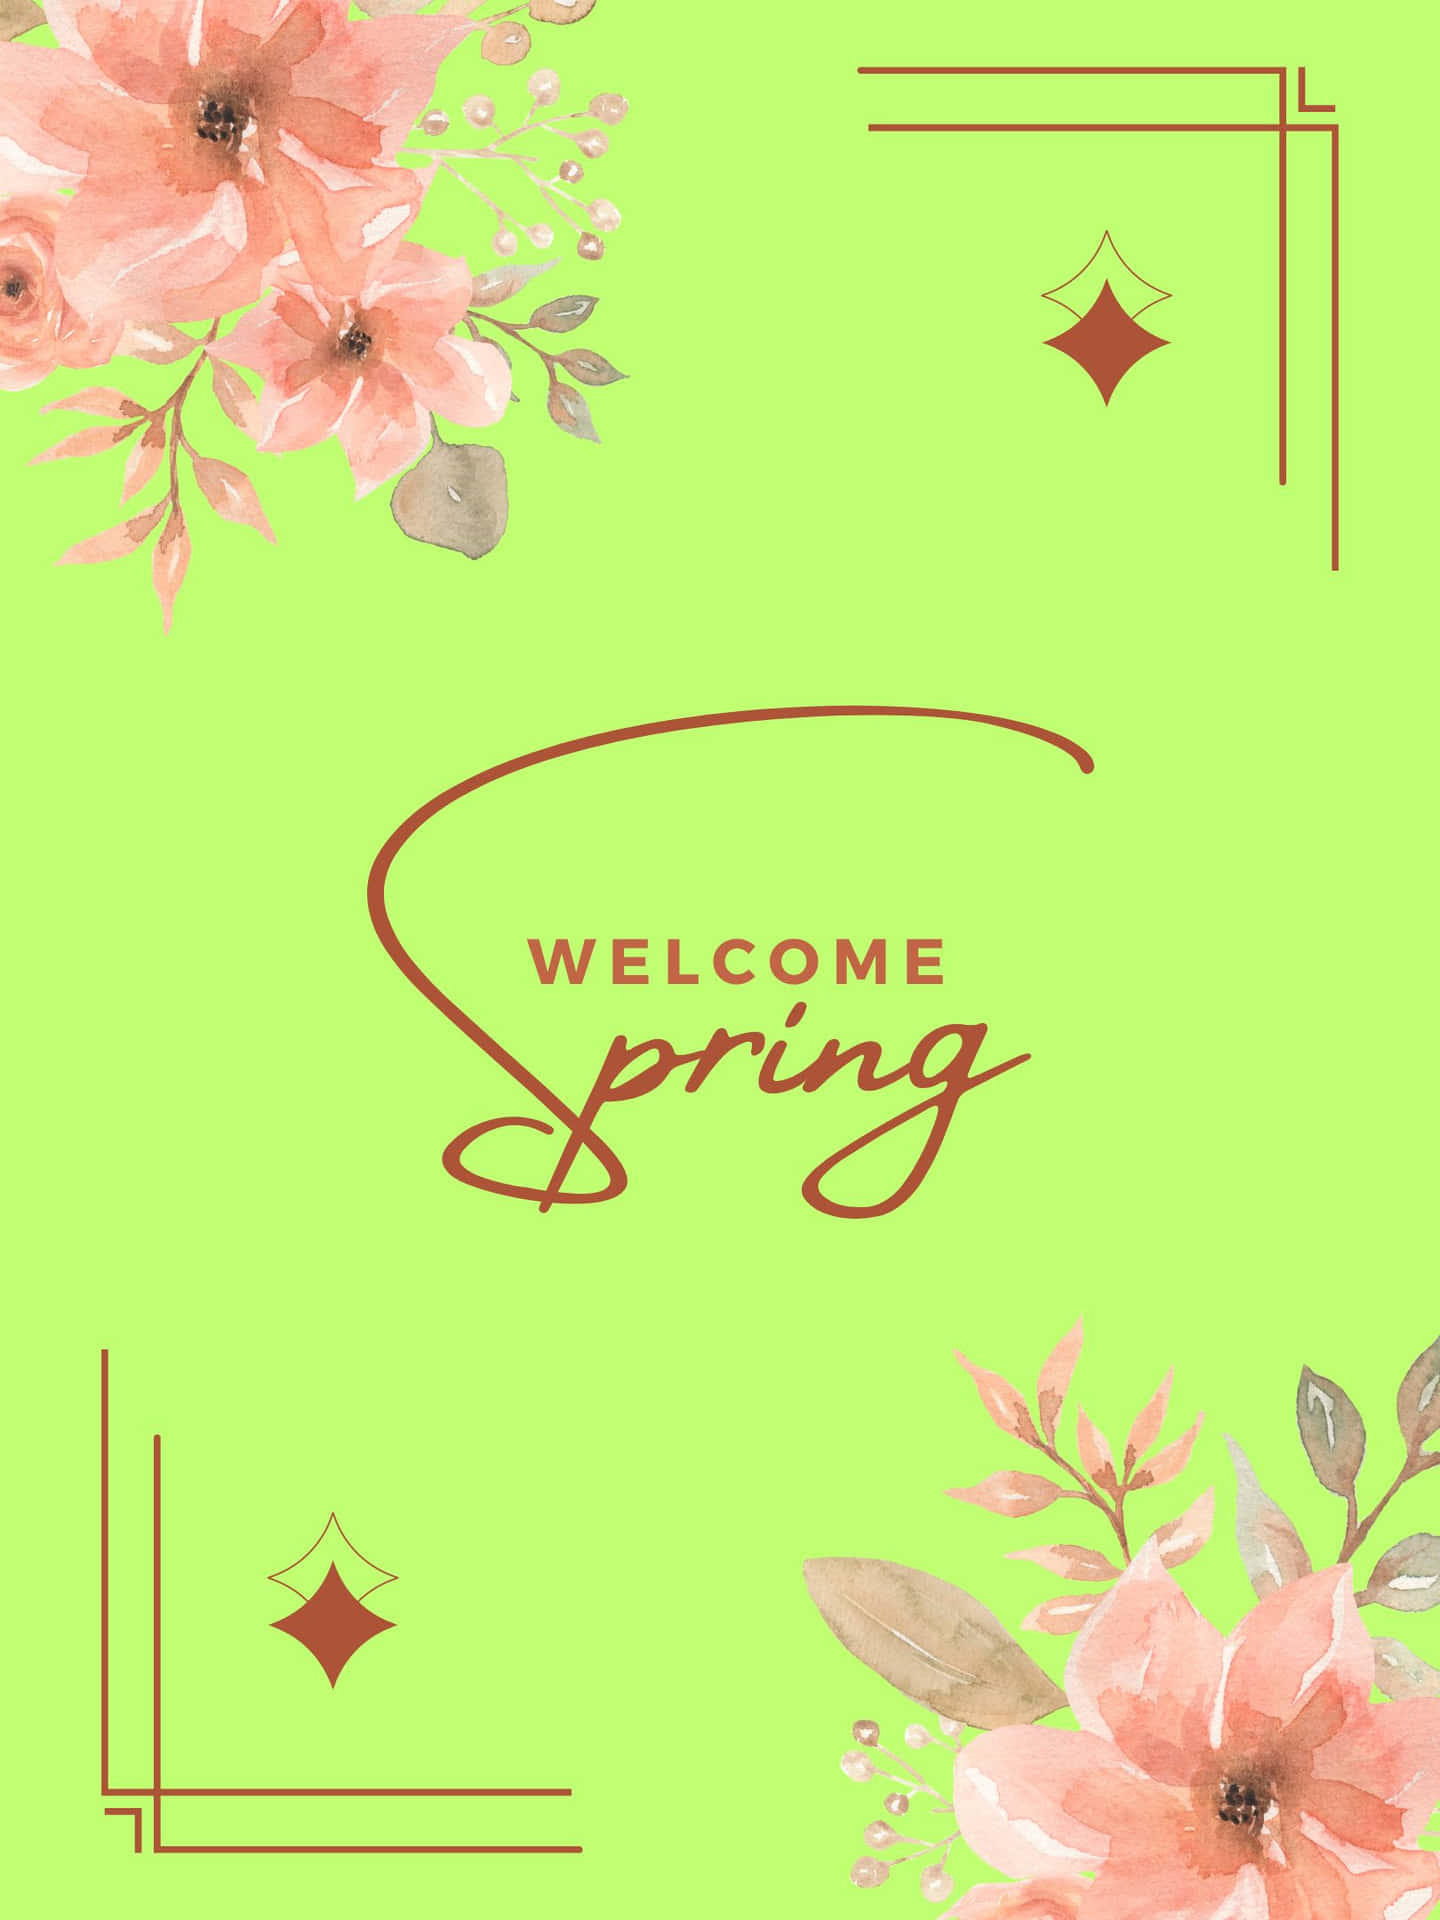 Welcome Spring Card With Flowers On A Green Background Wallpaper